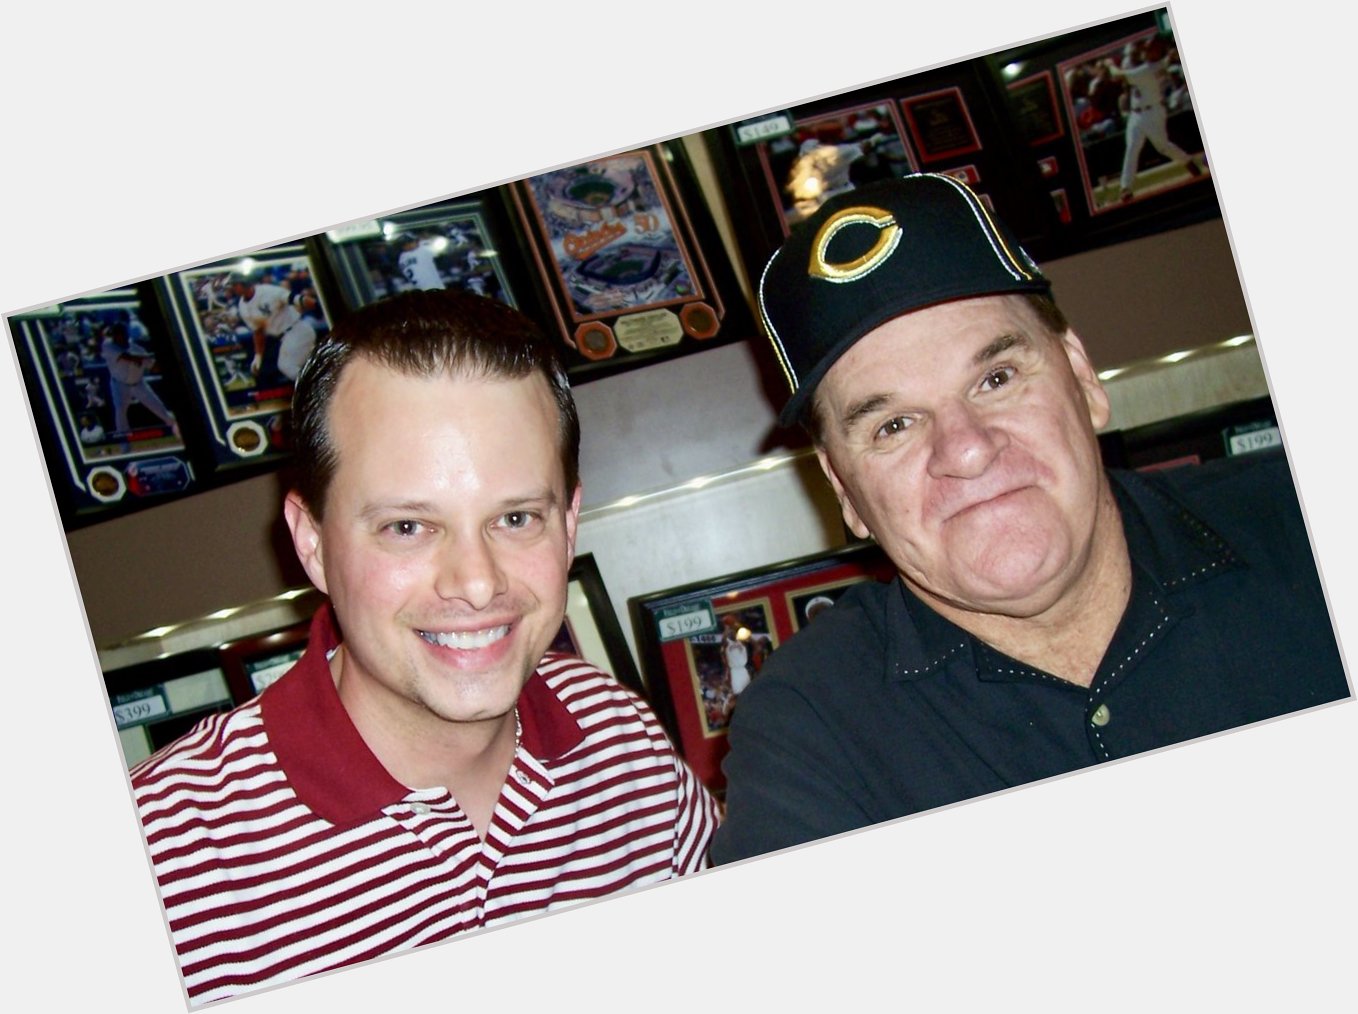 Happy **80th** birthday to the greatest player of my childhood generation, Charlie Hustle himself, Pete Rose. 